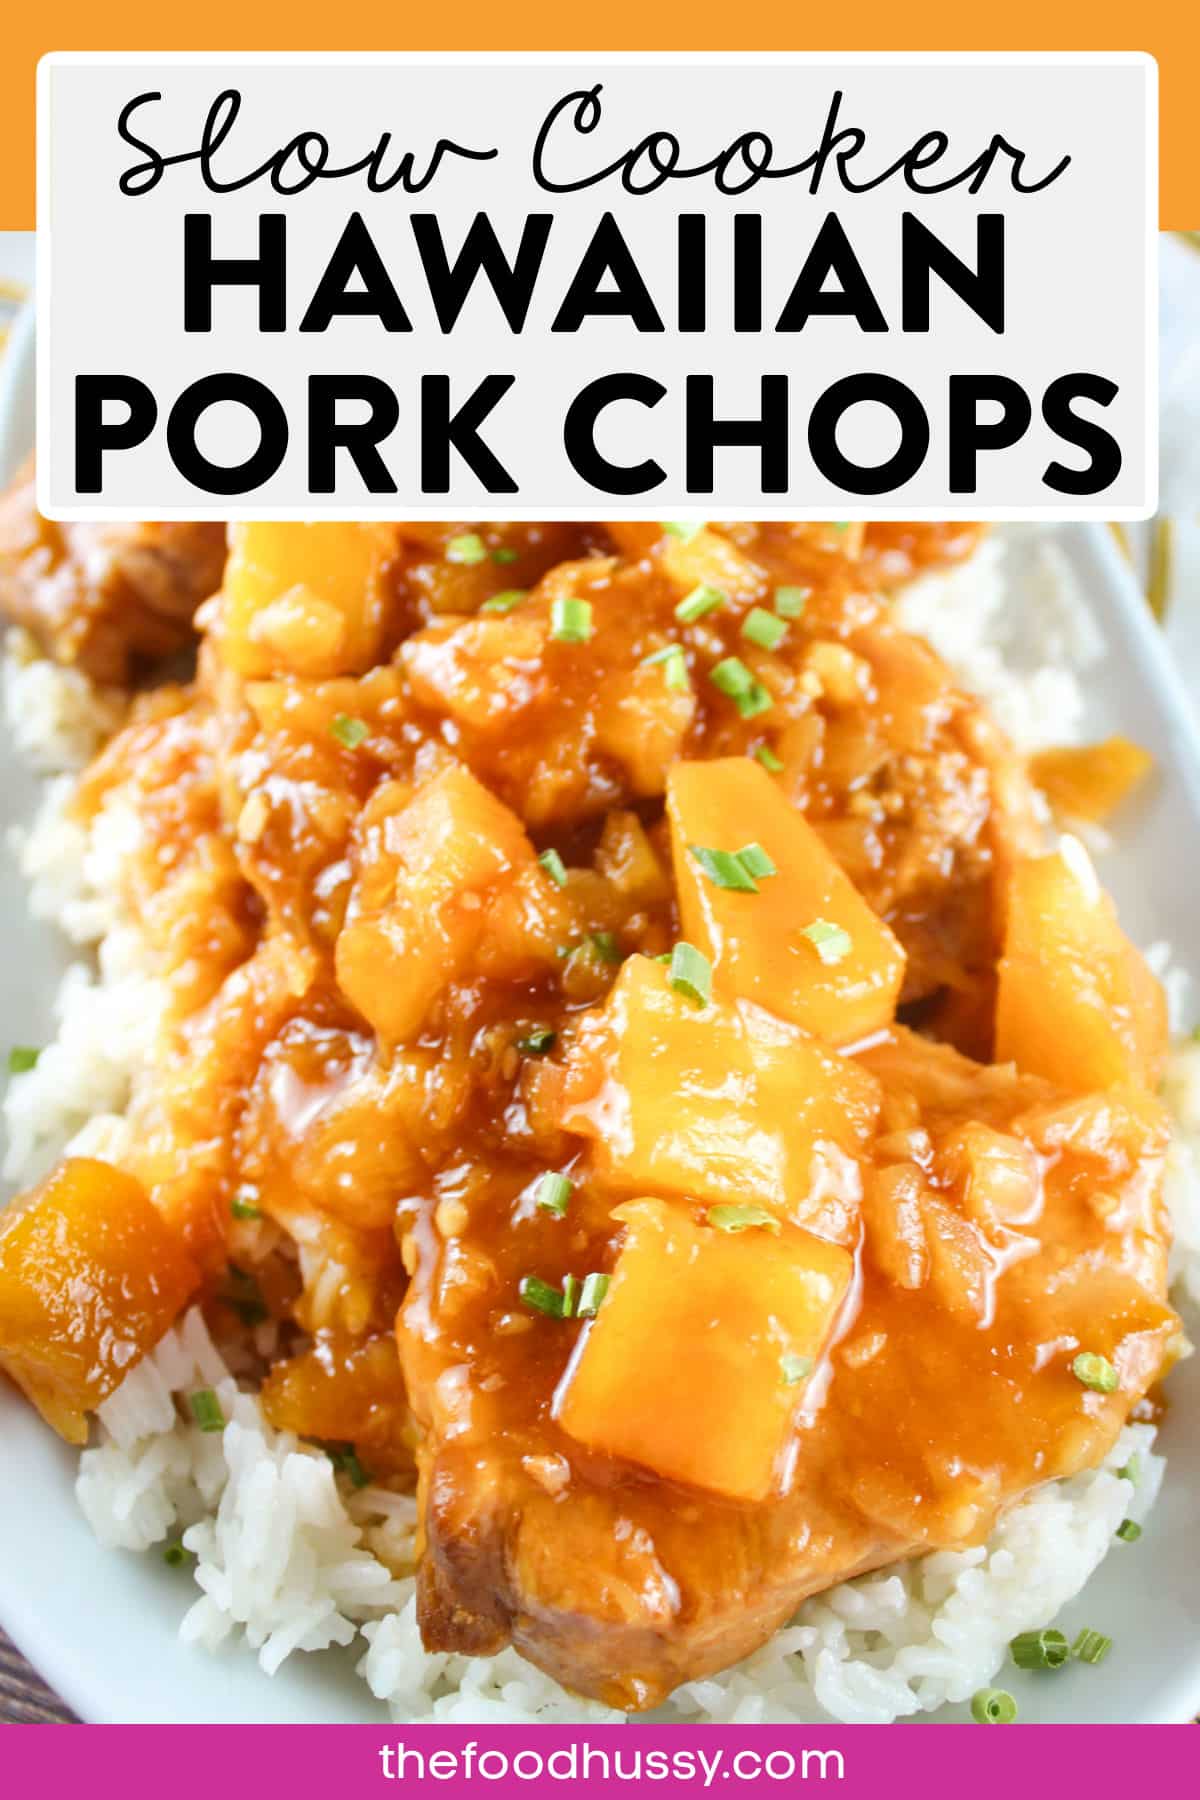 Slow Cooker Hawaiian Pork Chops are a family favorite! Tender boneless pork chops coated in a thick sweet & sour sauce with juicy chunks of pineapple.   via @foodhussy